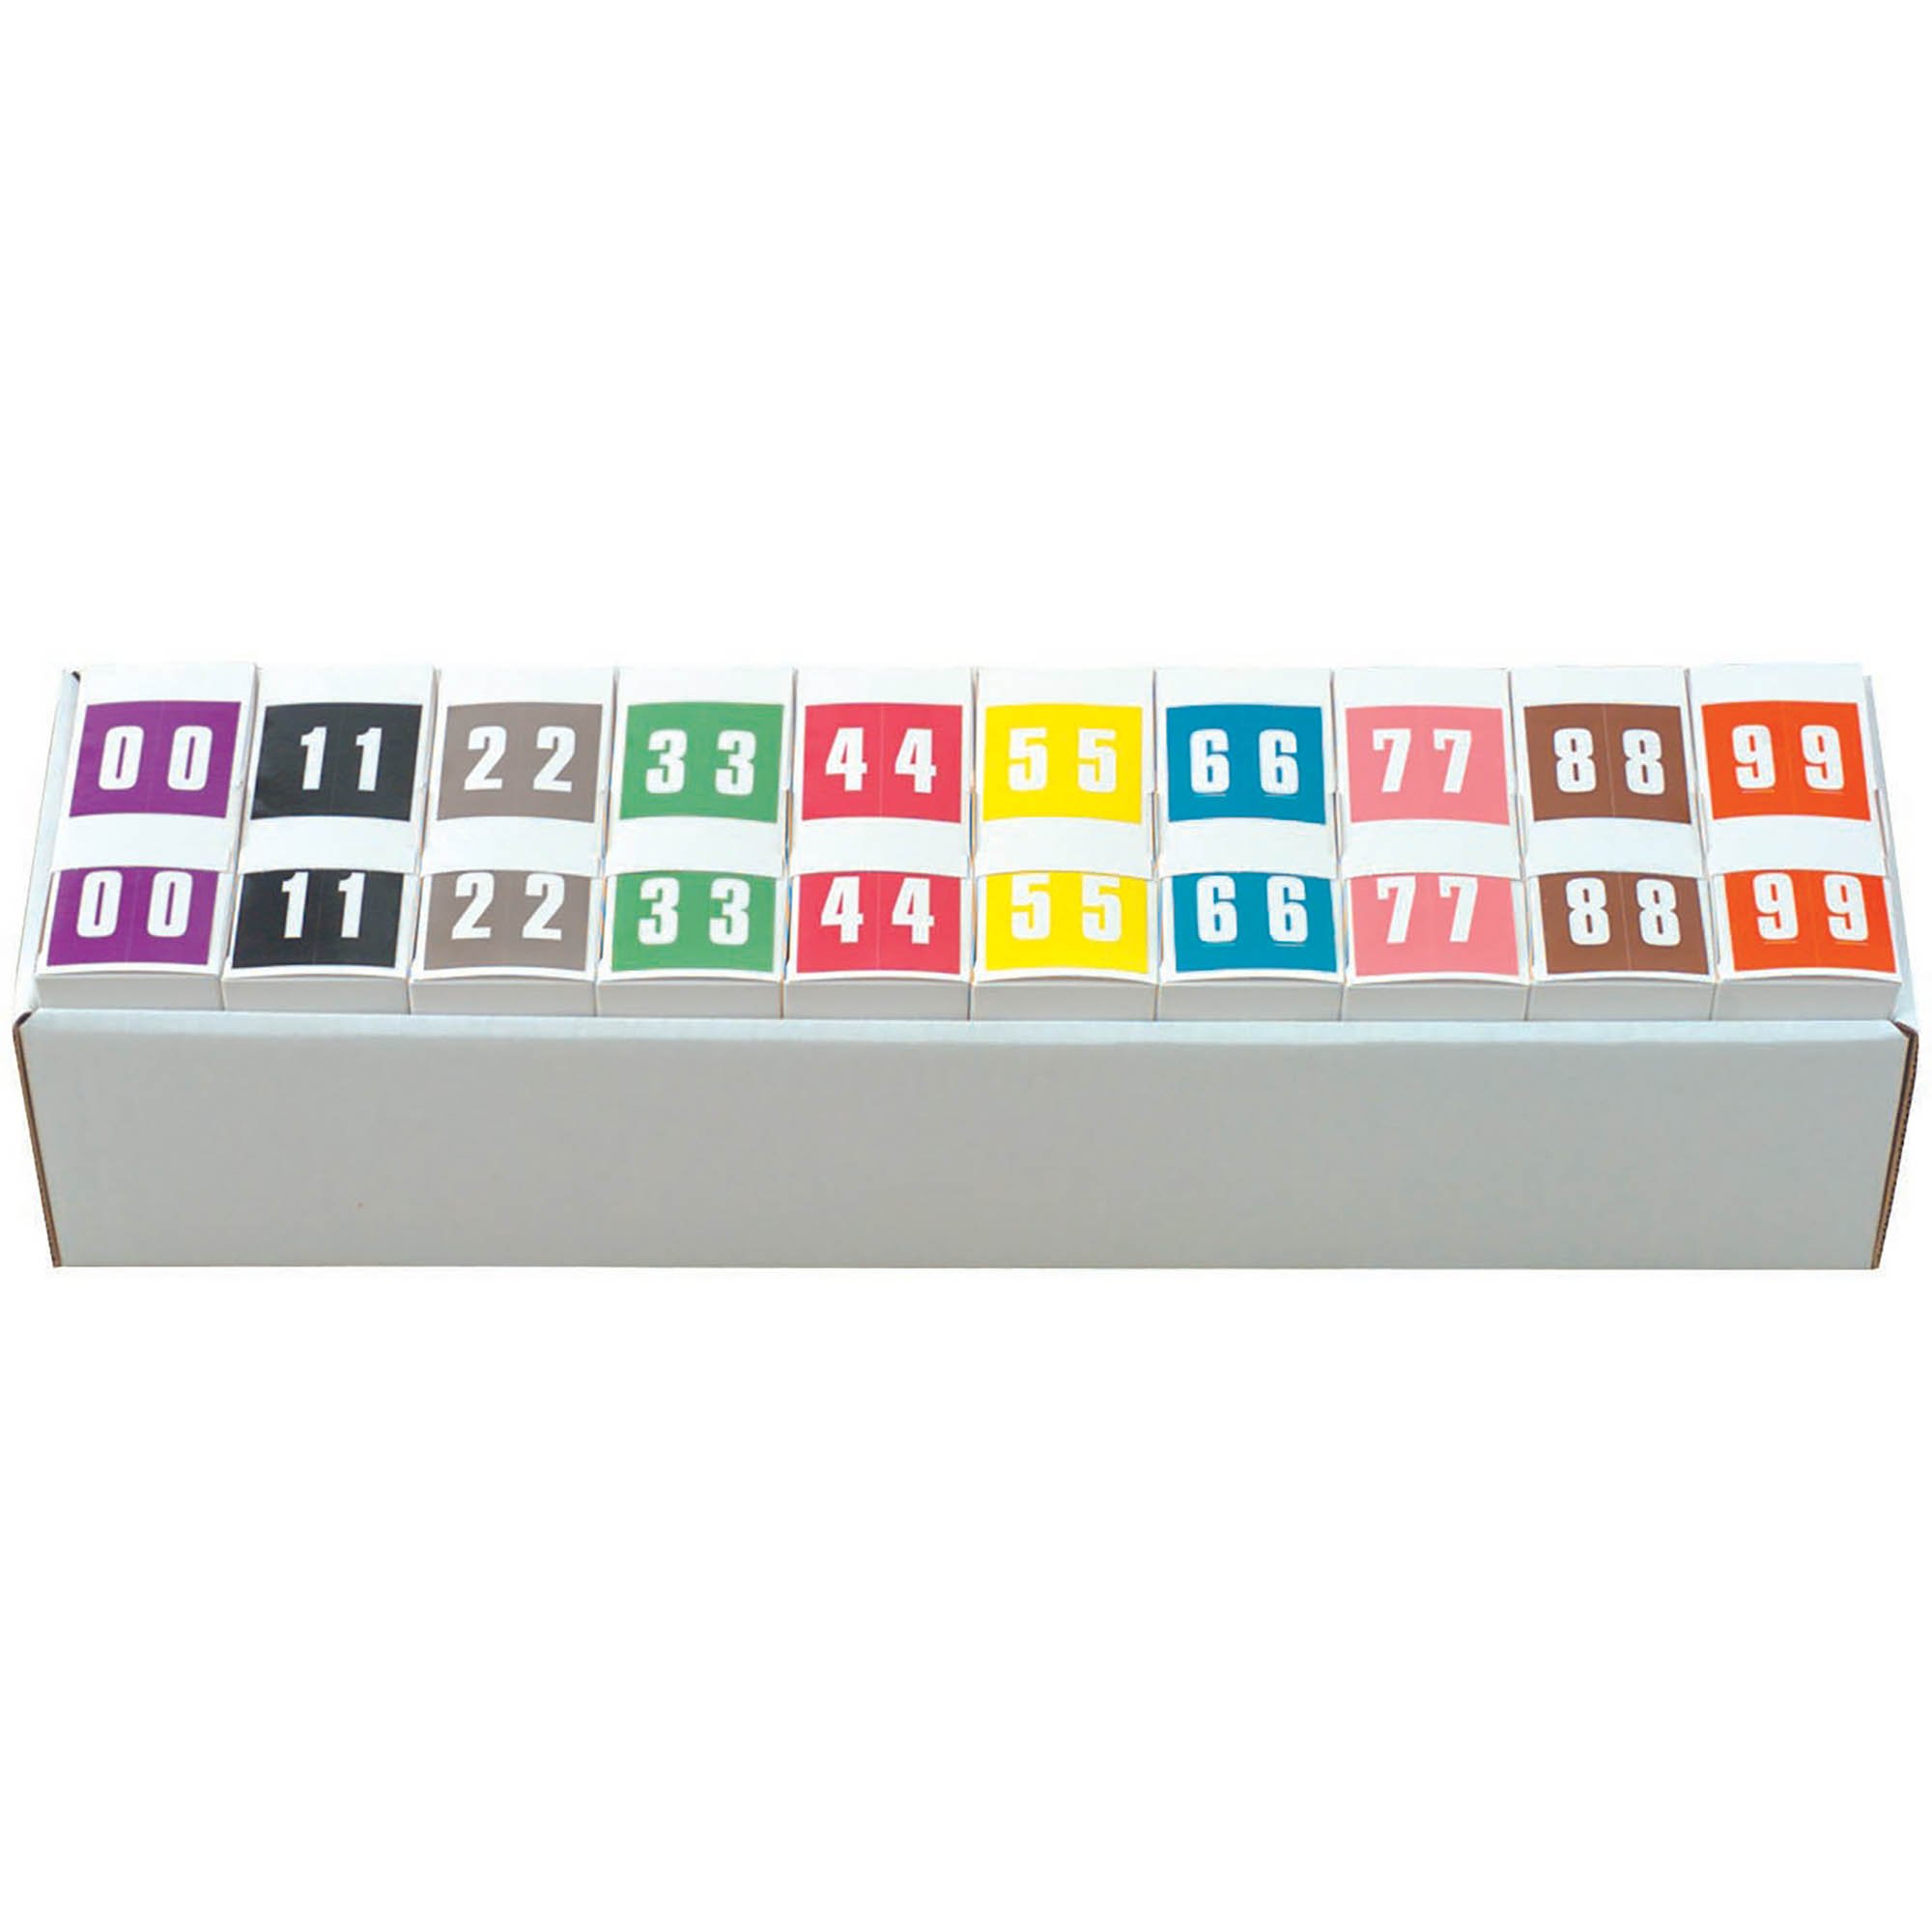 IFC #CL3300 Match System #3 Numeric Color Roll Labels - Set of Number 0 to 9